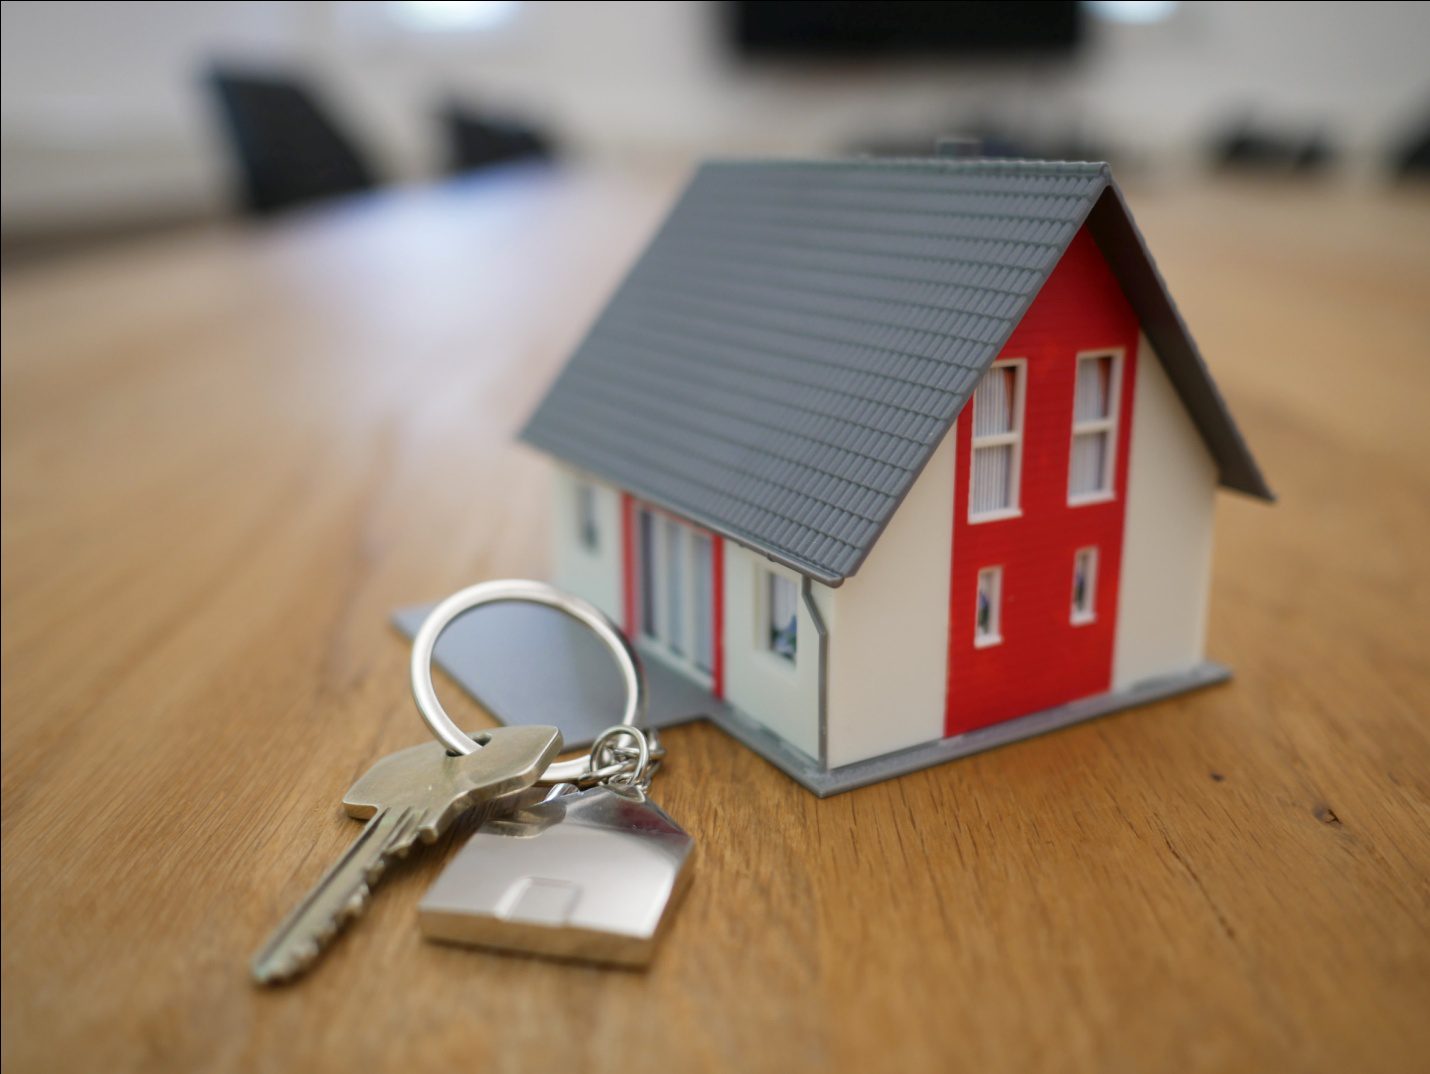 Protect your property with locksmith services in Poway